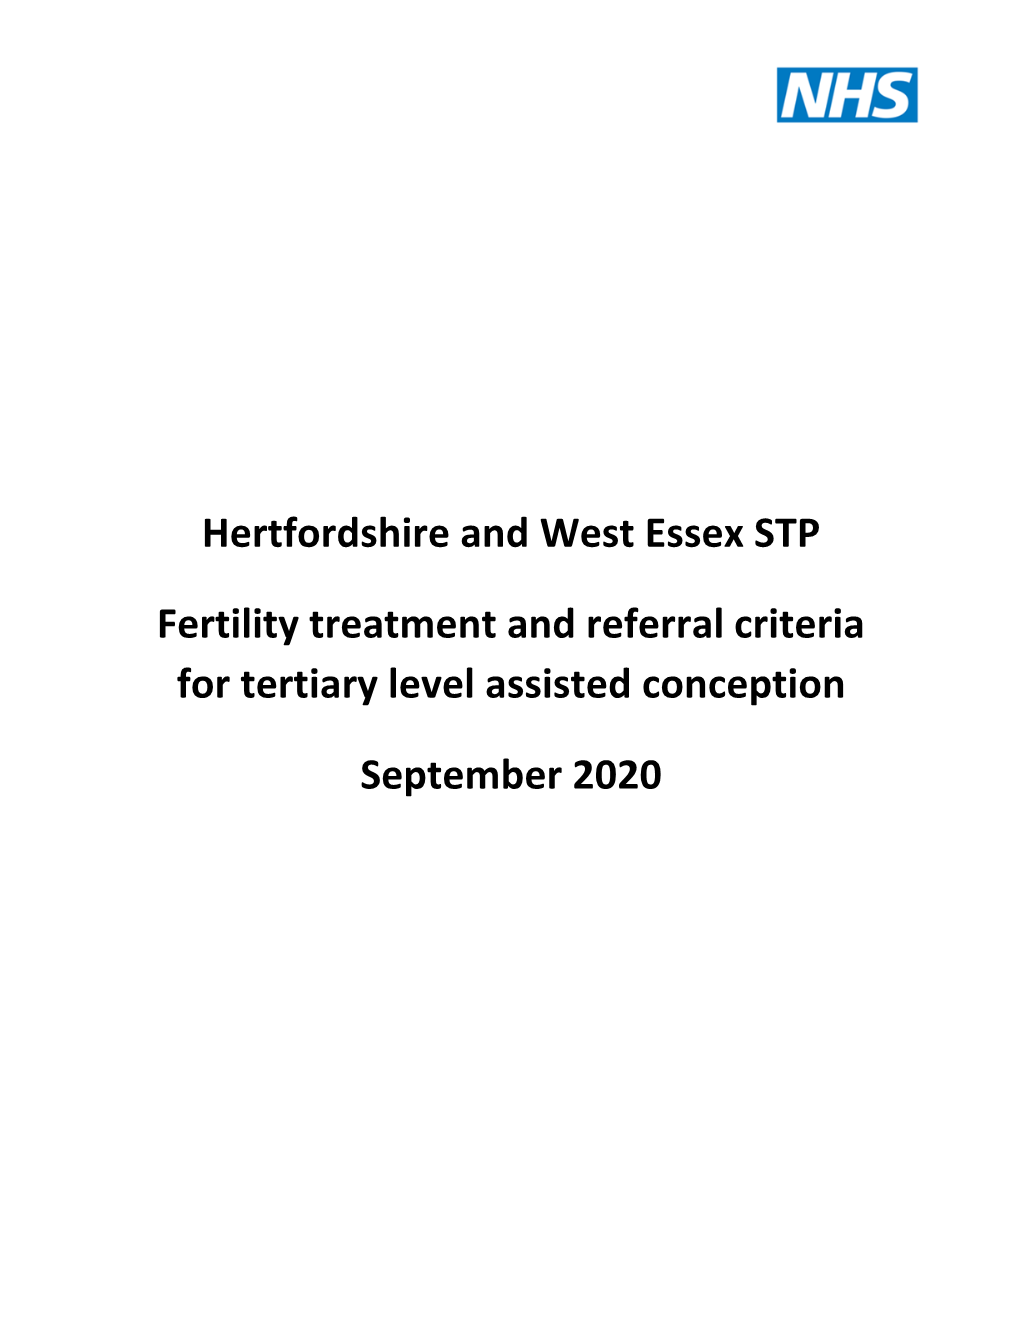 Hertfordshire and West Essex STP Fertility Treatment and Referral